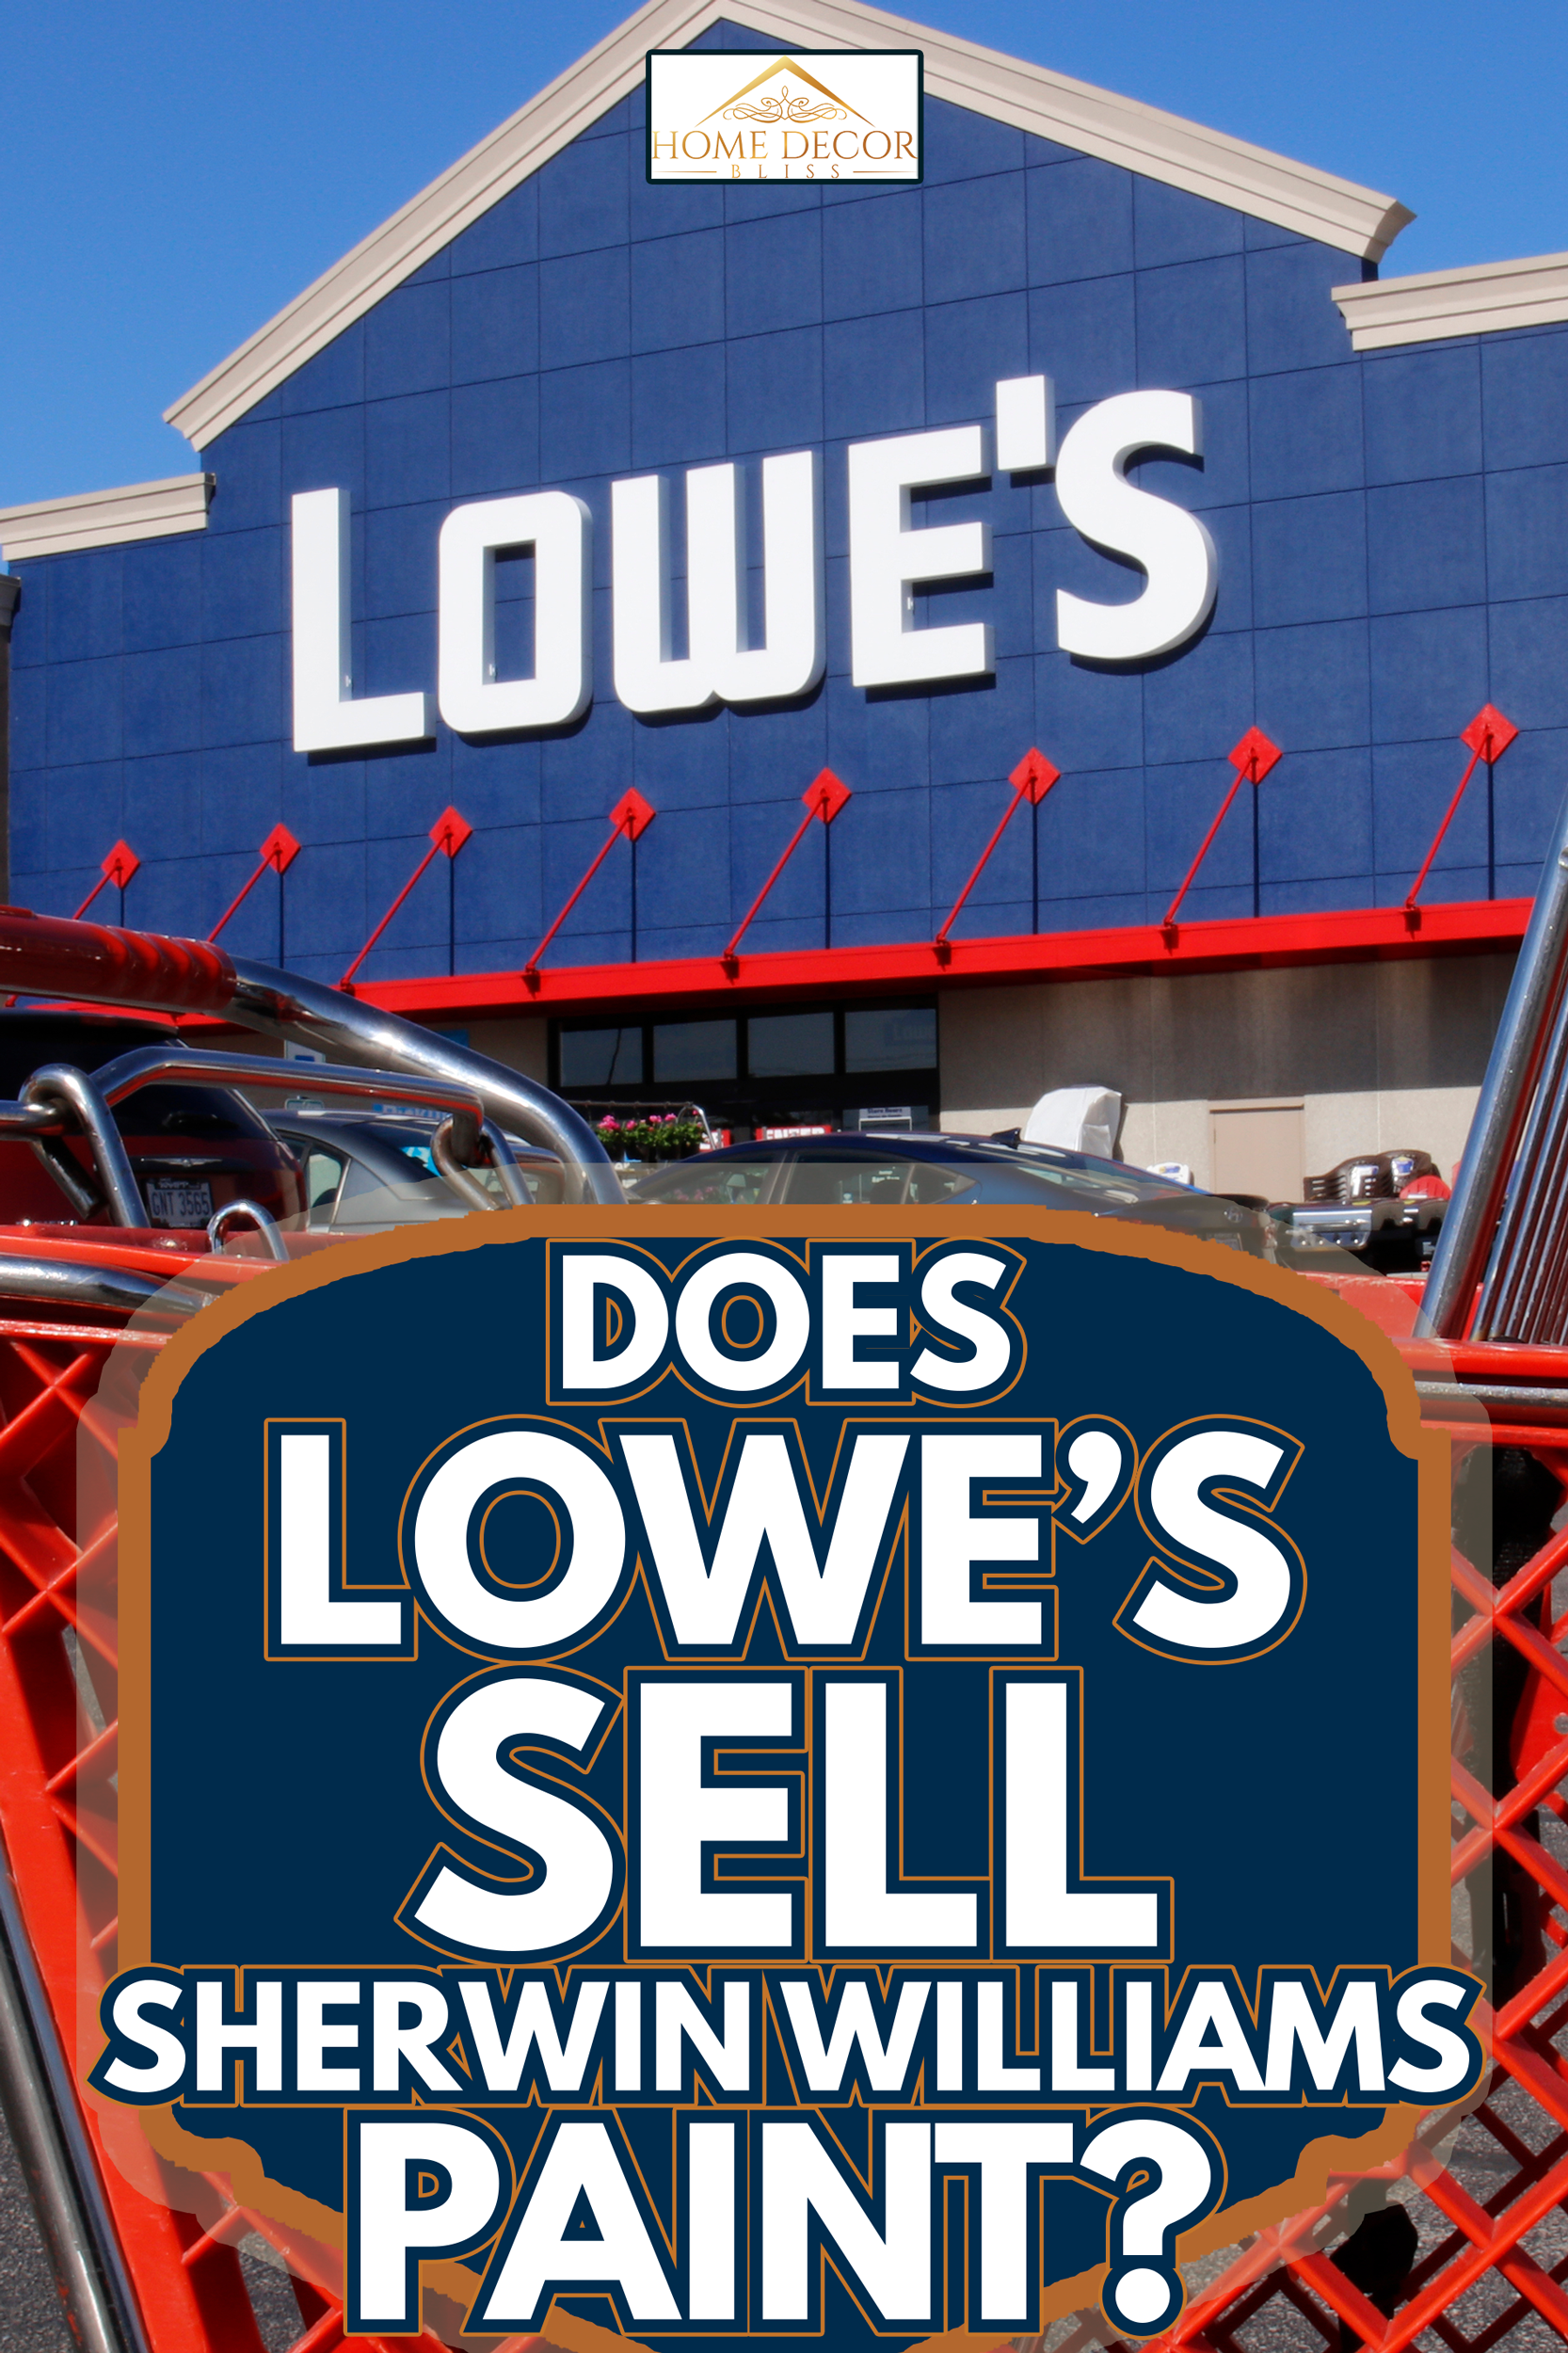 Lowe's Home Improvement Warehouse. Lowe's operates retail home improvement and appliance stores in North America - Does Lowe's Sell Sherwin Williams Paint